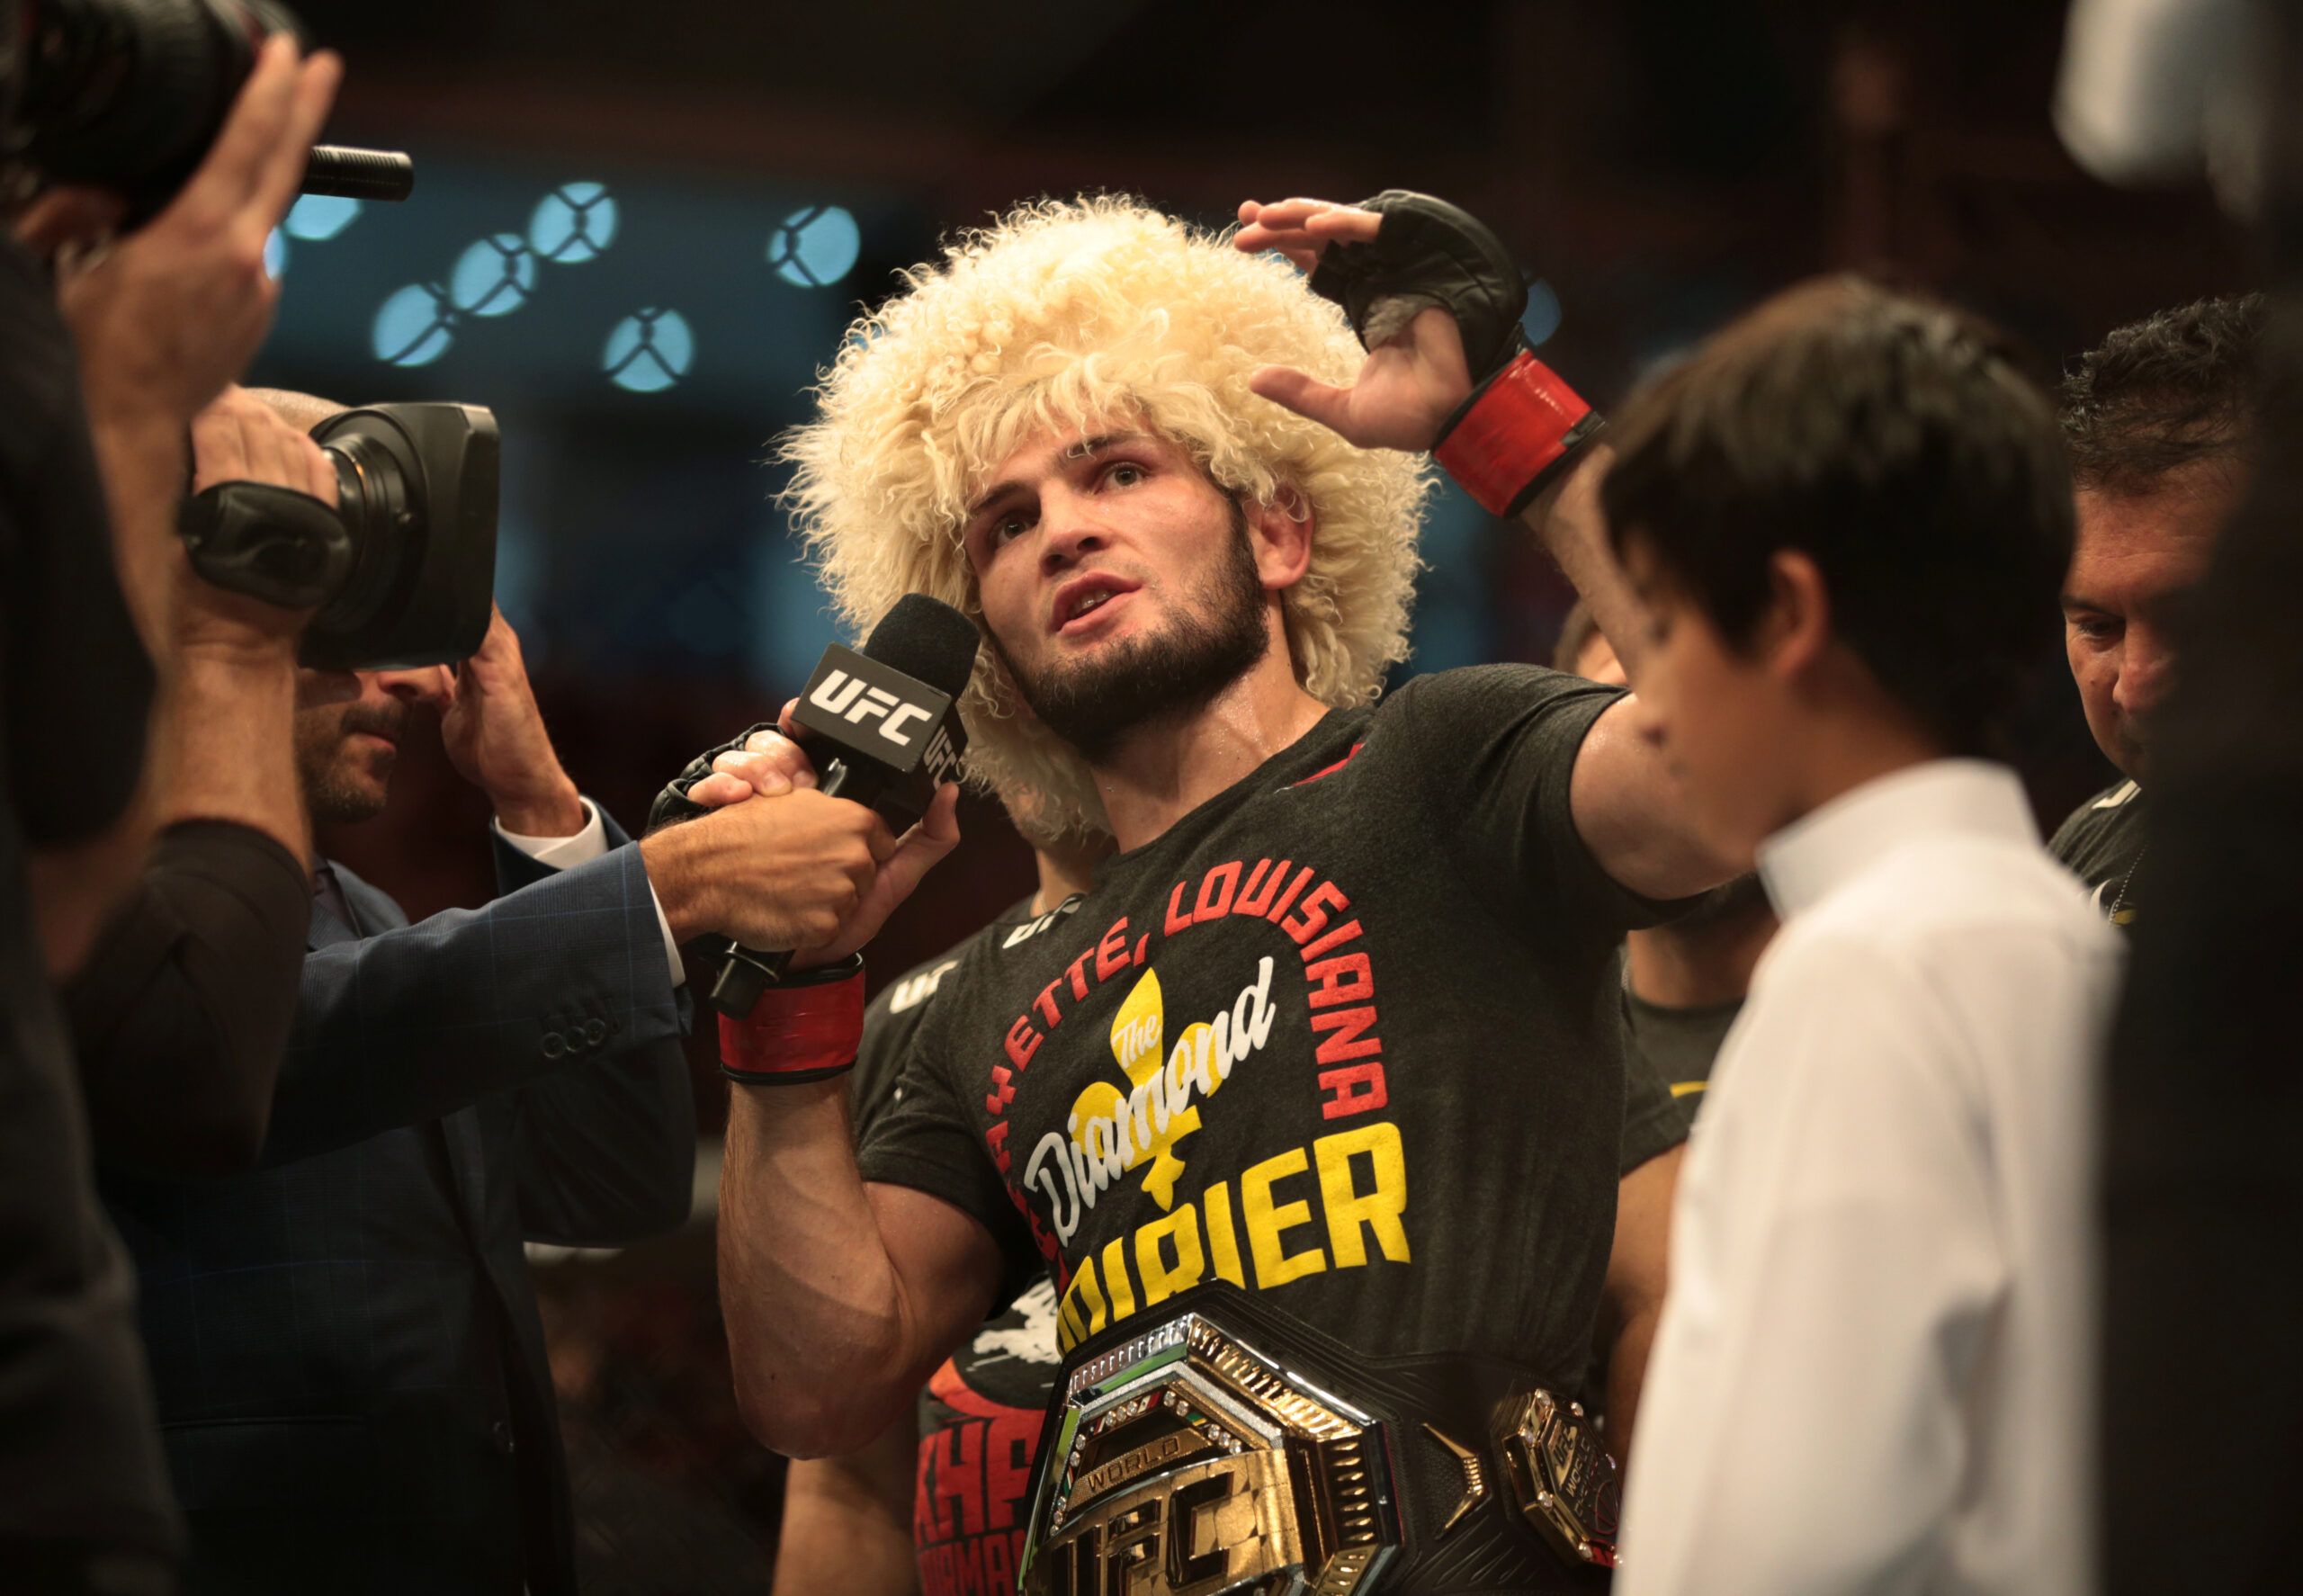 Khabib Nurmagomedov is regarded as one of the greatest fighters of his generation